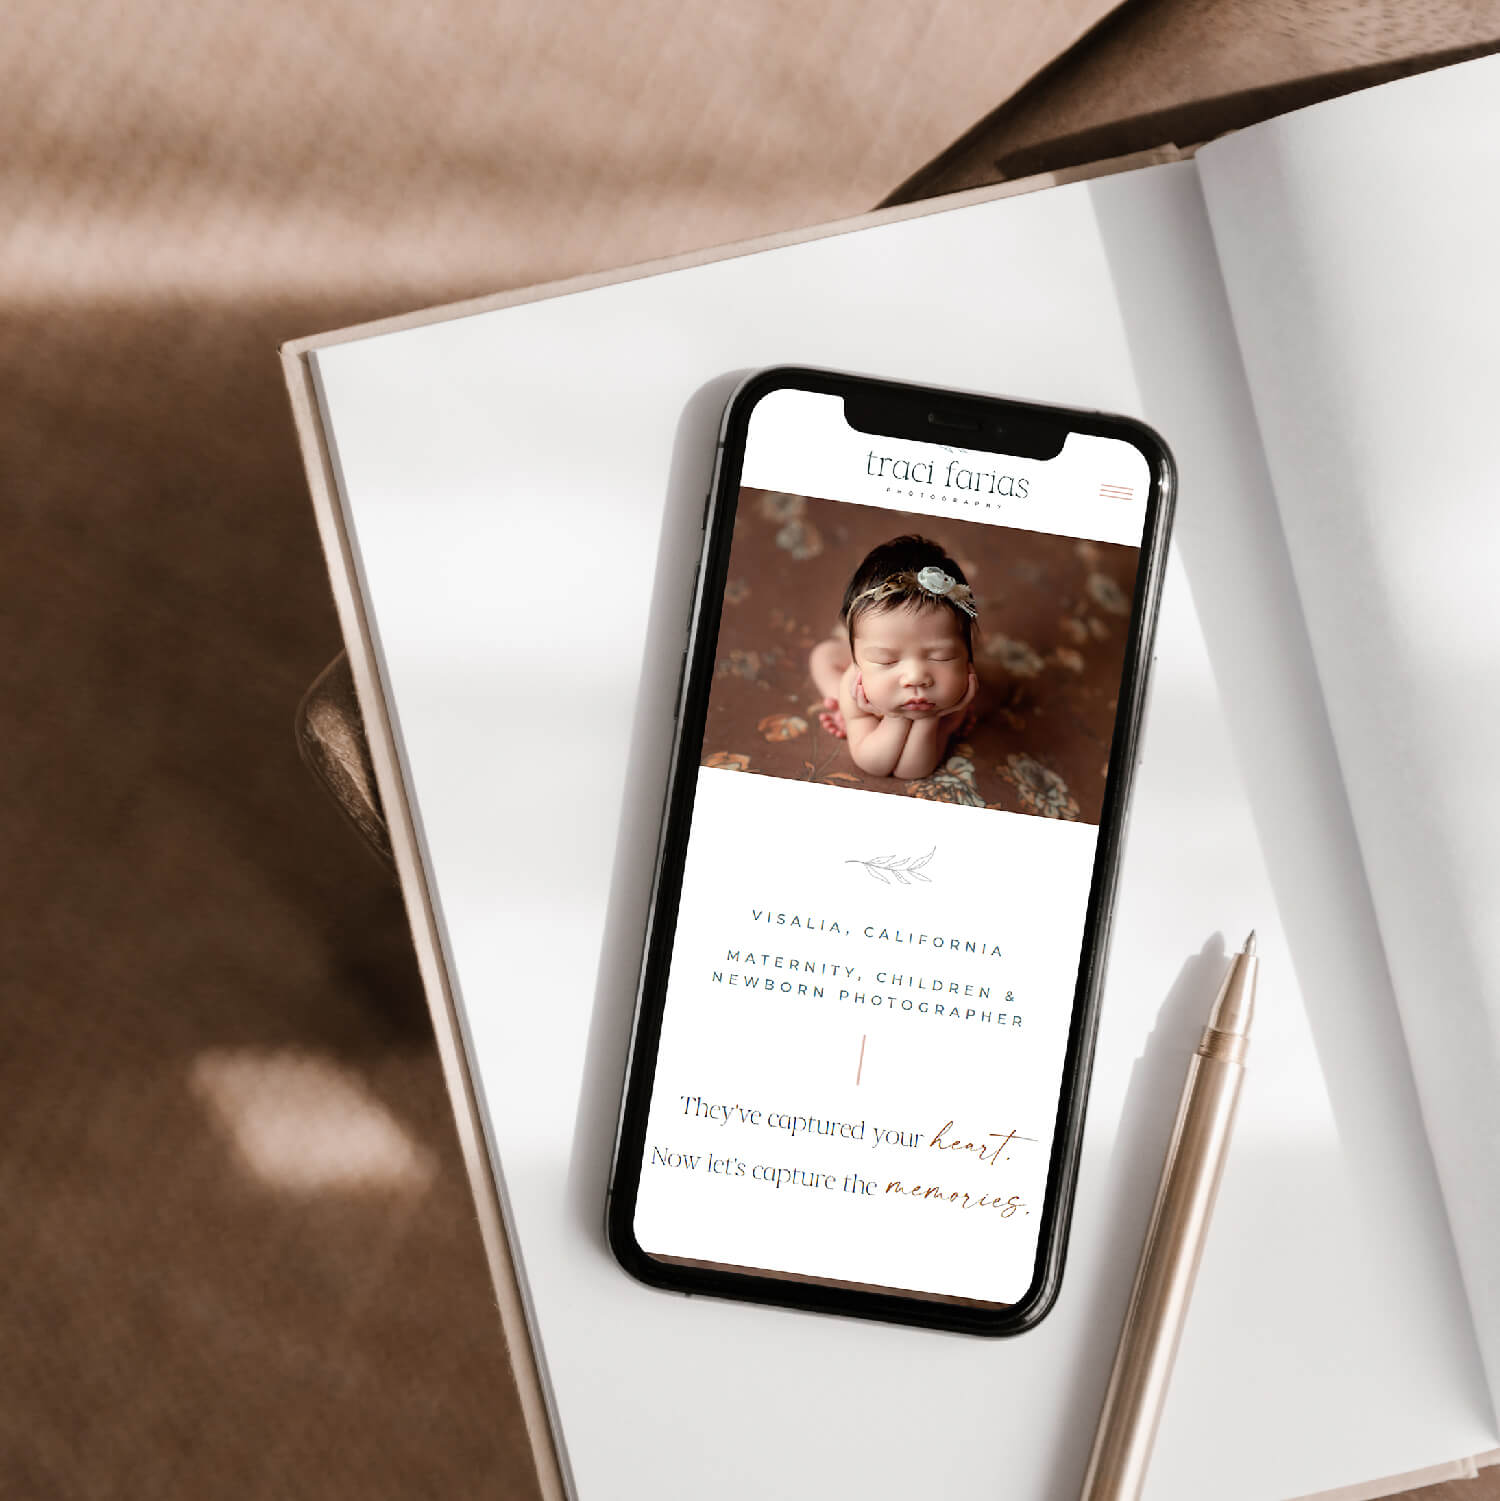 A smartphone on an open book displaying a photography website with a photo of a sleeping newborn. The site includes text for maternity, children, and newborn photography services in Visalia, California, with the tagline, 'They've captured your heart. Now let's capture the memories.'